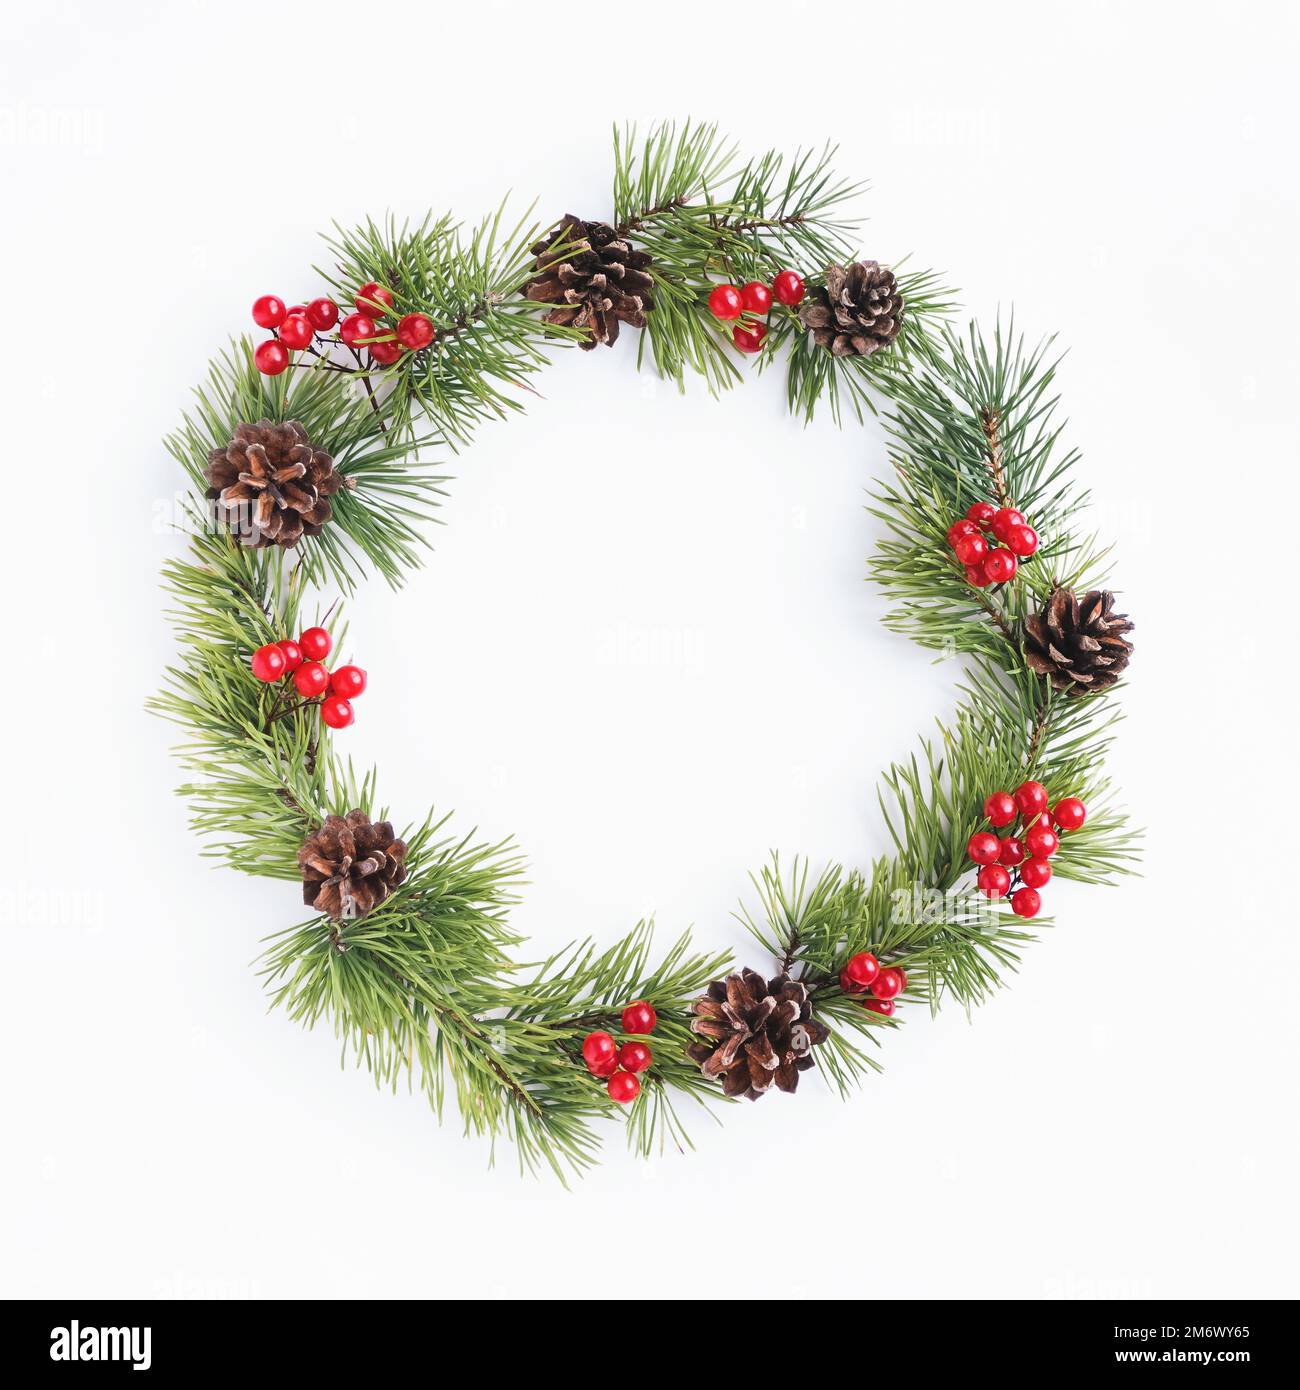 Pine christmas wreath decorated with cones and red berry fruits on white background Stock Photo